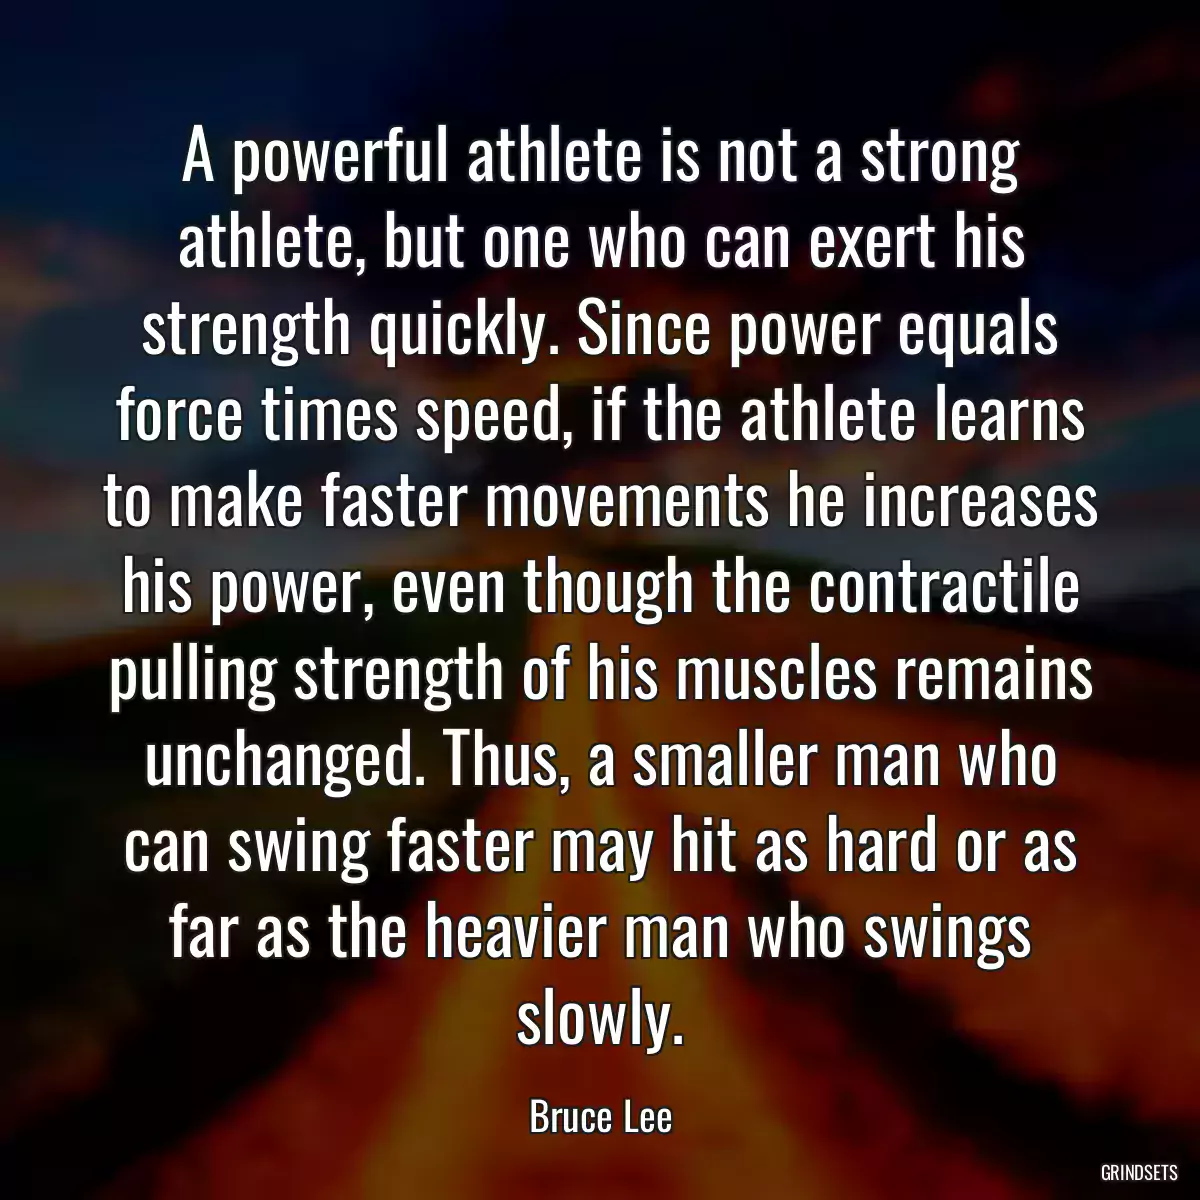 A powerful athlete is not a strong athlete, but one who can exert his strength quickly. Since power equals force times speed, if the athlete learns to make faster movements he increases his power, even though the contractile pulling strength of his muscles remains unchanged. Thus, a smaller man who can swing faster may hit as hard or as far as the heavier man who swings slowly.